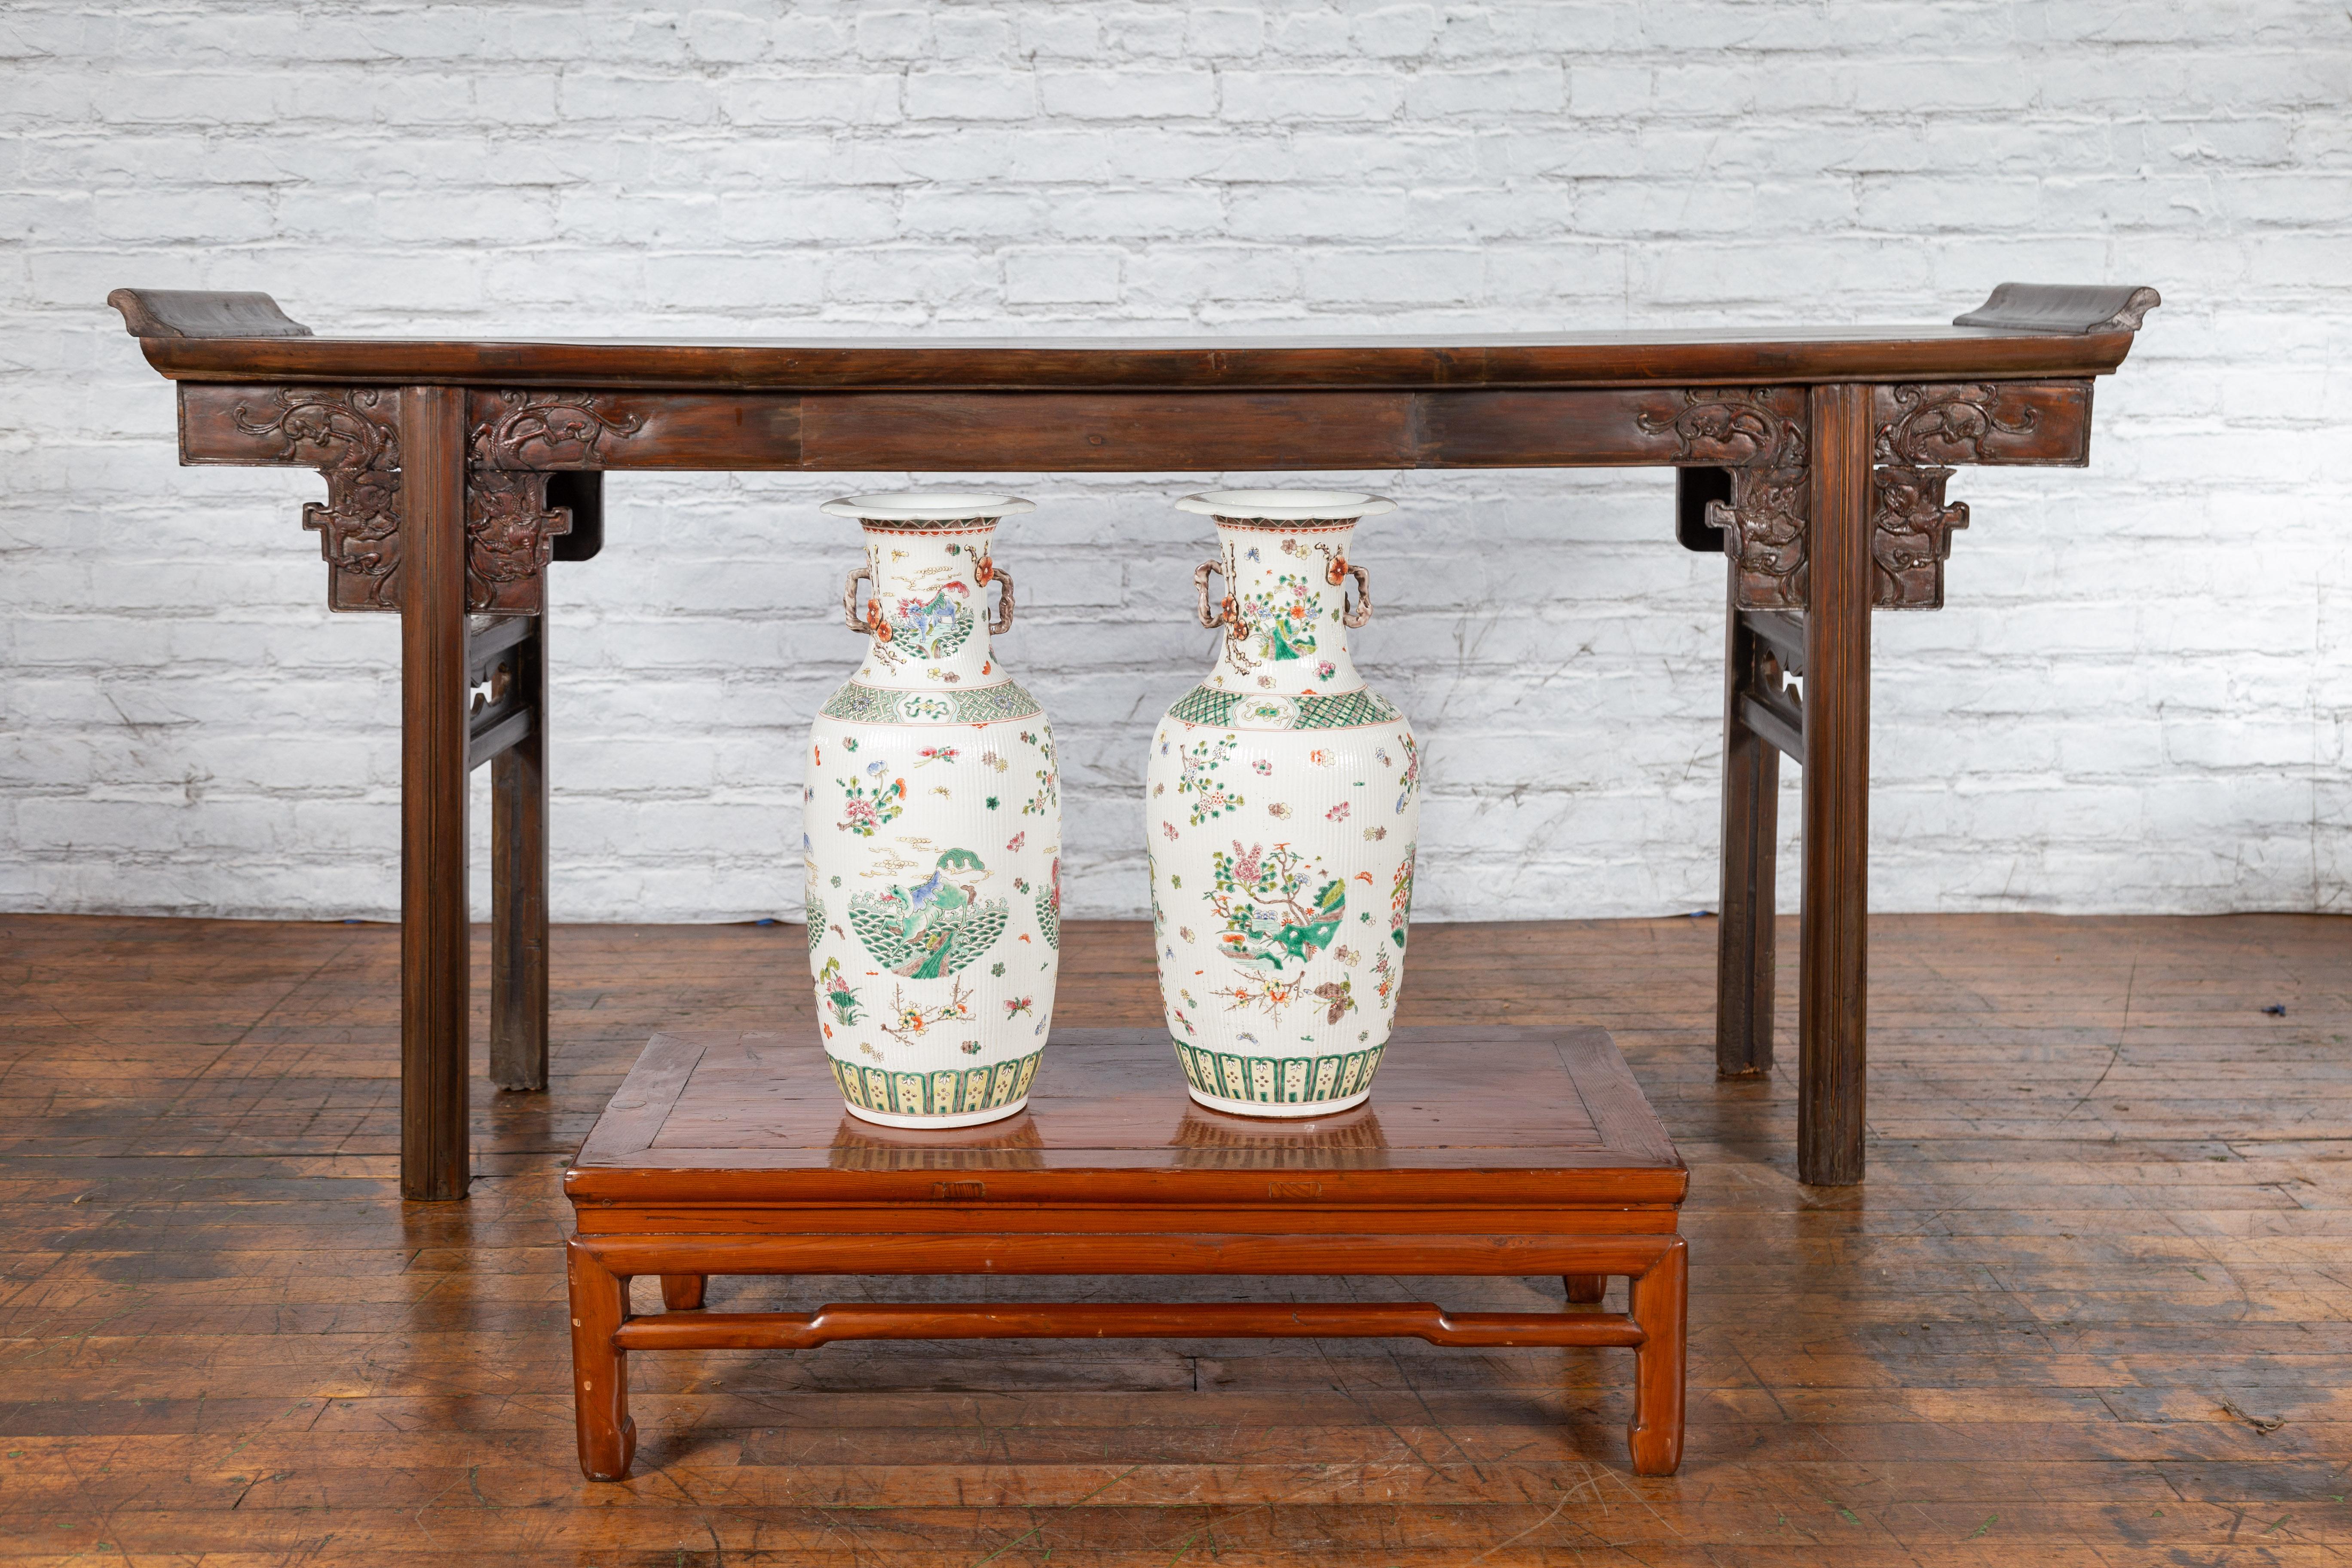 A pair of Chinese antique porcelain vases from the early 20th century, with hand-painted flowers, butterflies and mythical animals. Created in China during the early years of the 20th century, each of this pair of porcelain vases attracts our